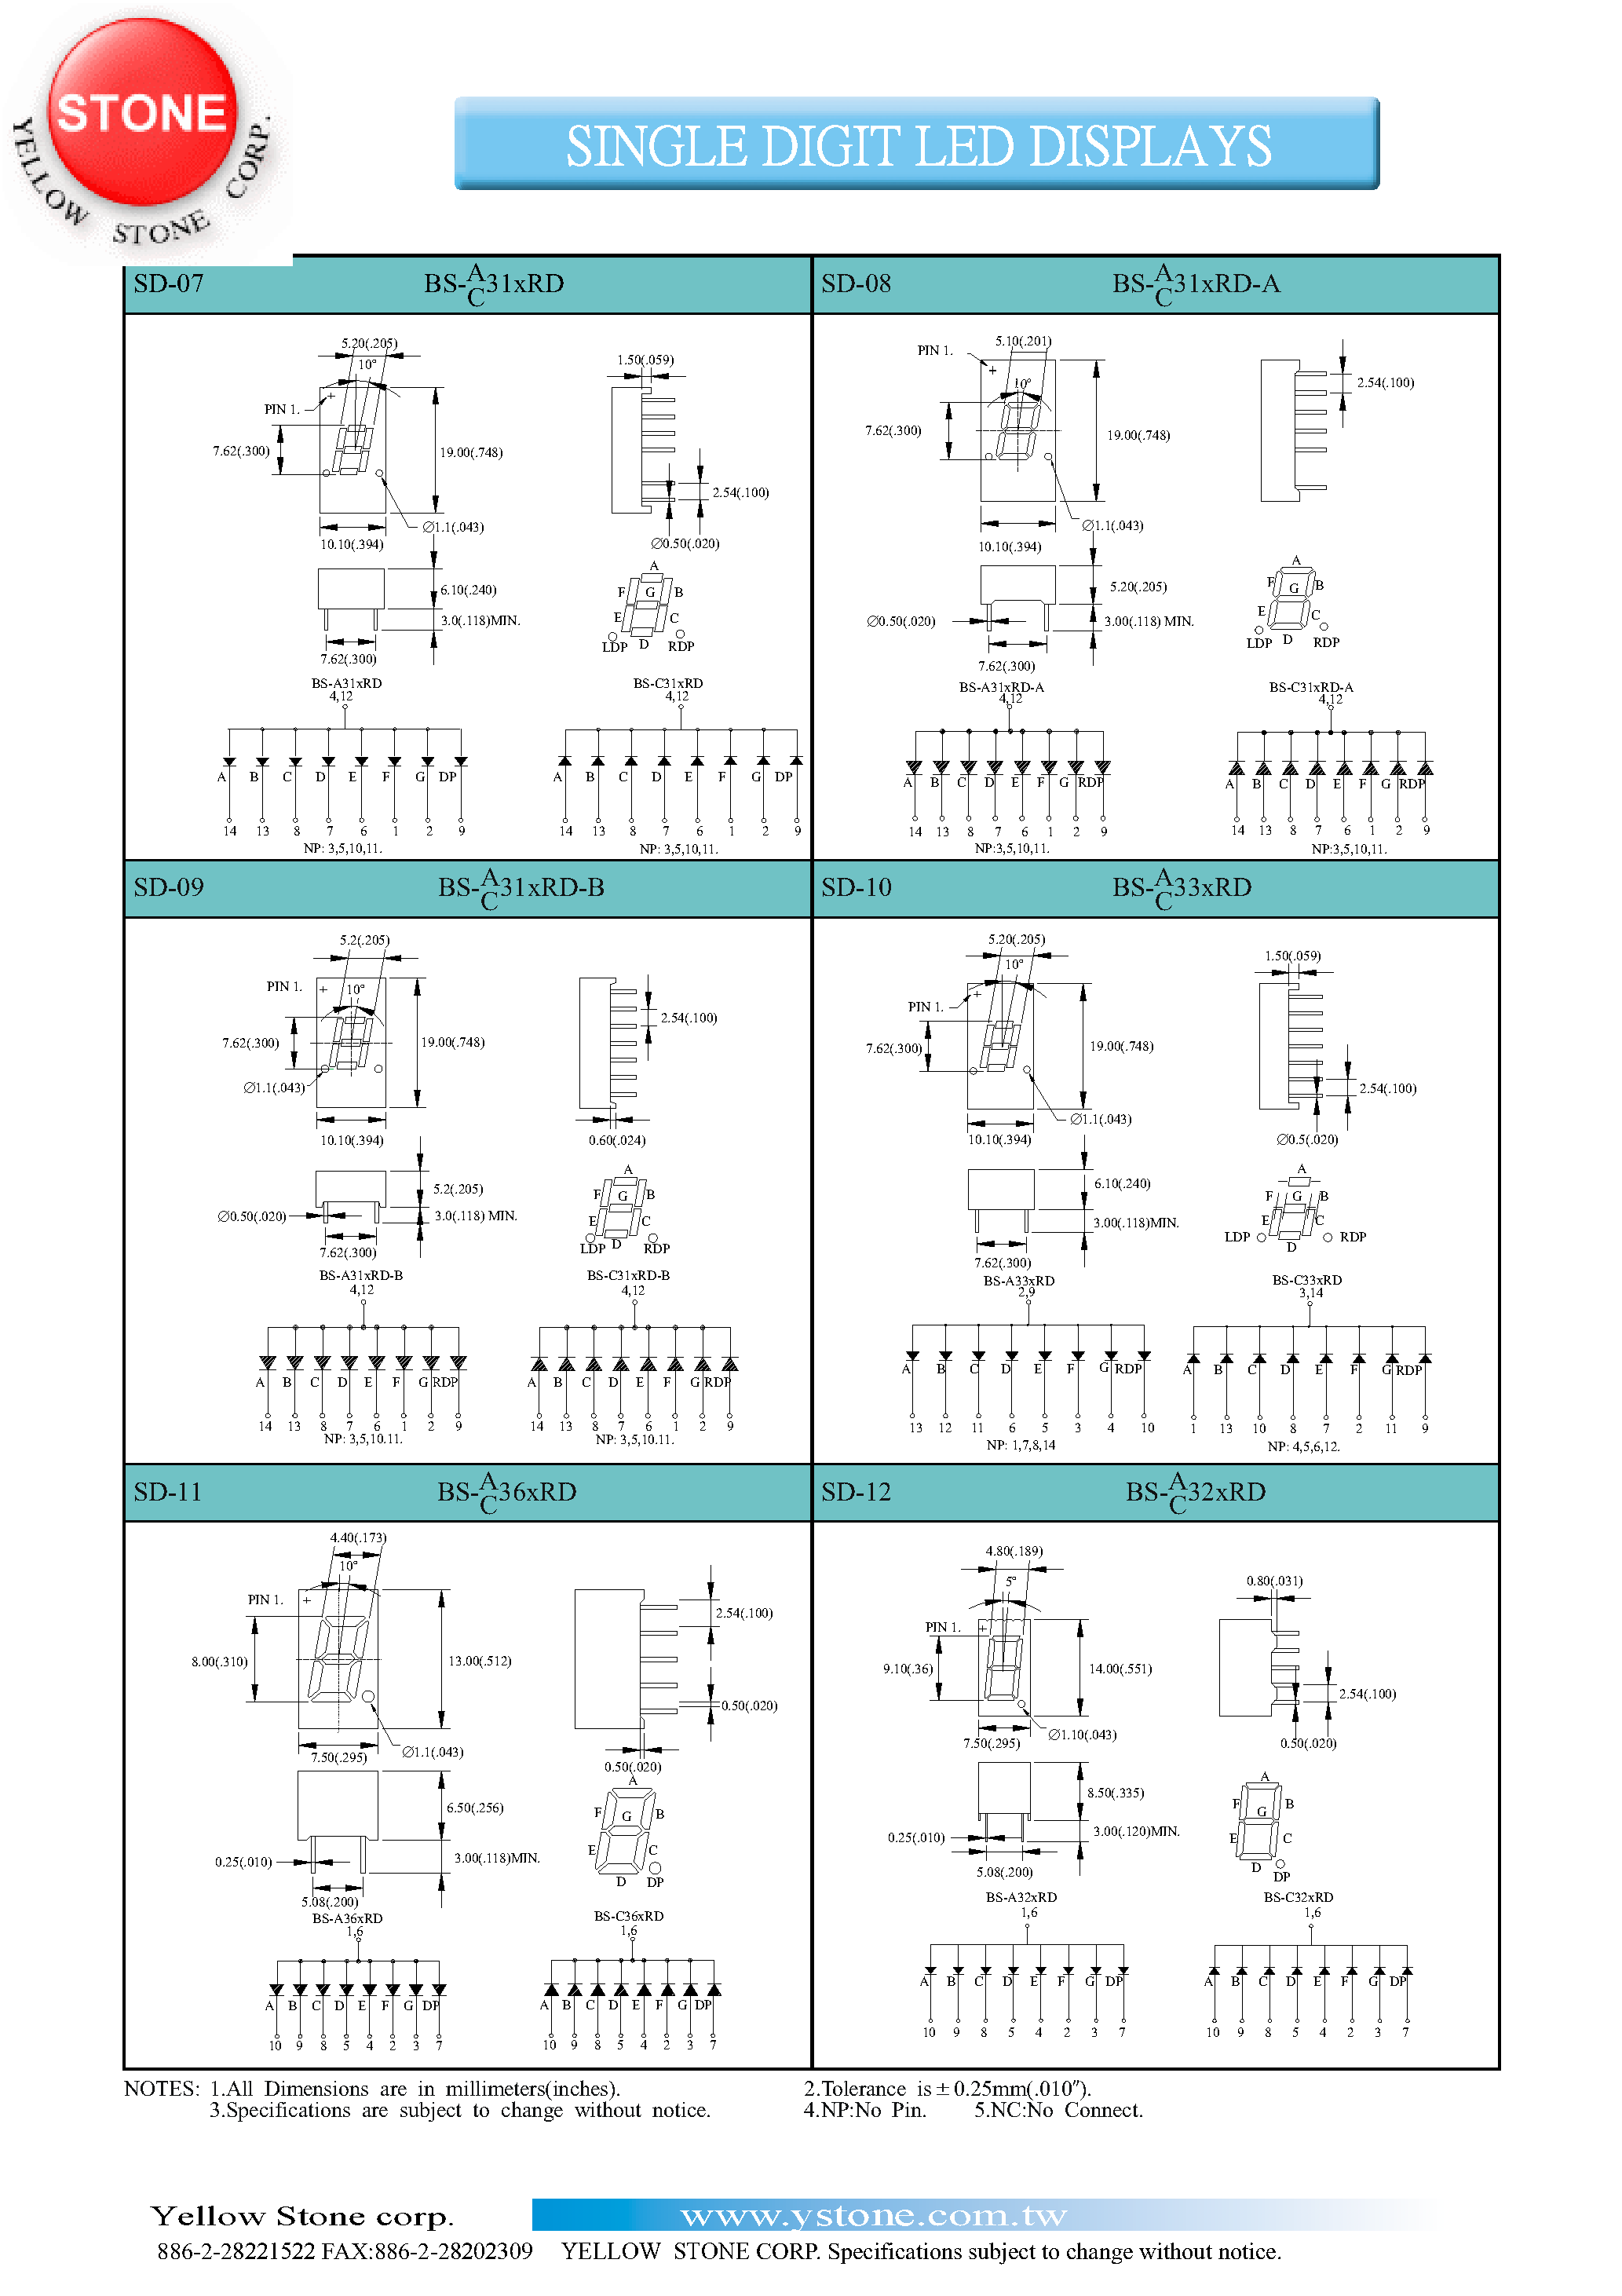 Datasheet BS-A313RD-B - SINGLE DIGIT LED DISPLAYS page 2